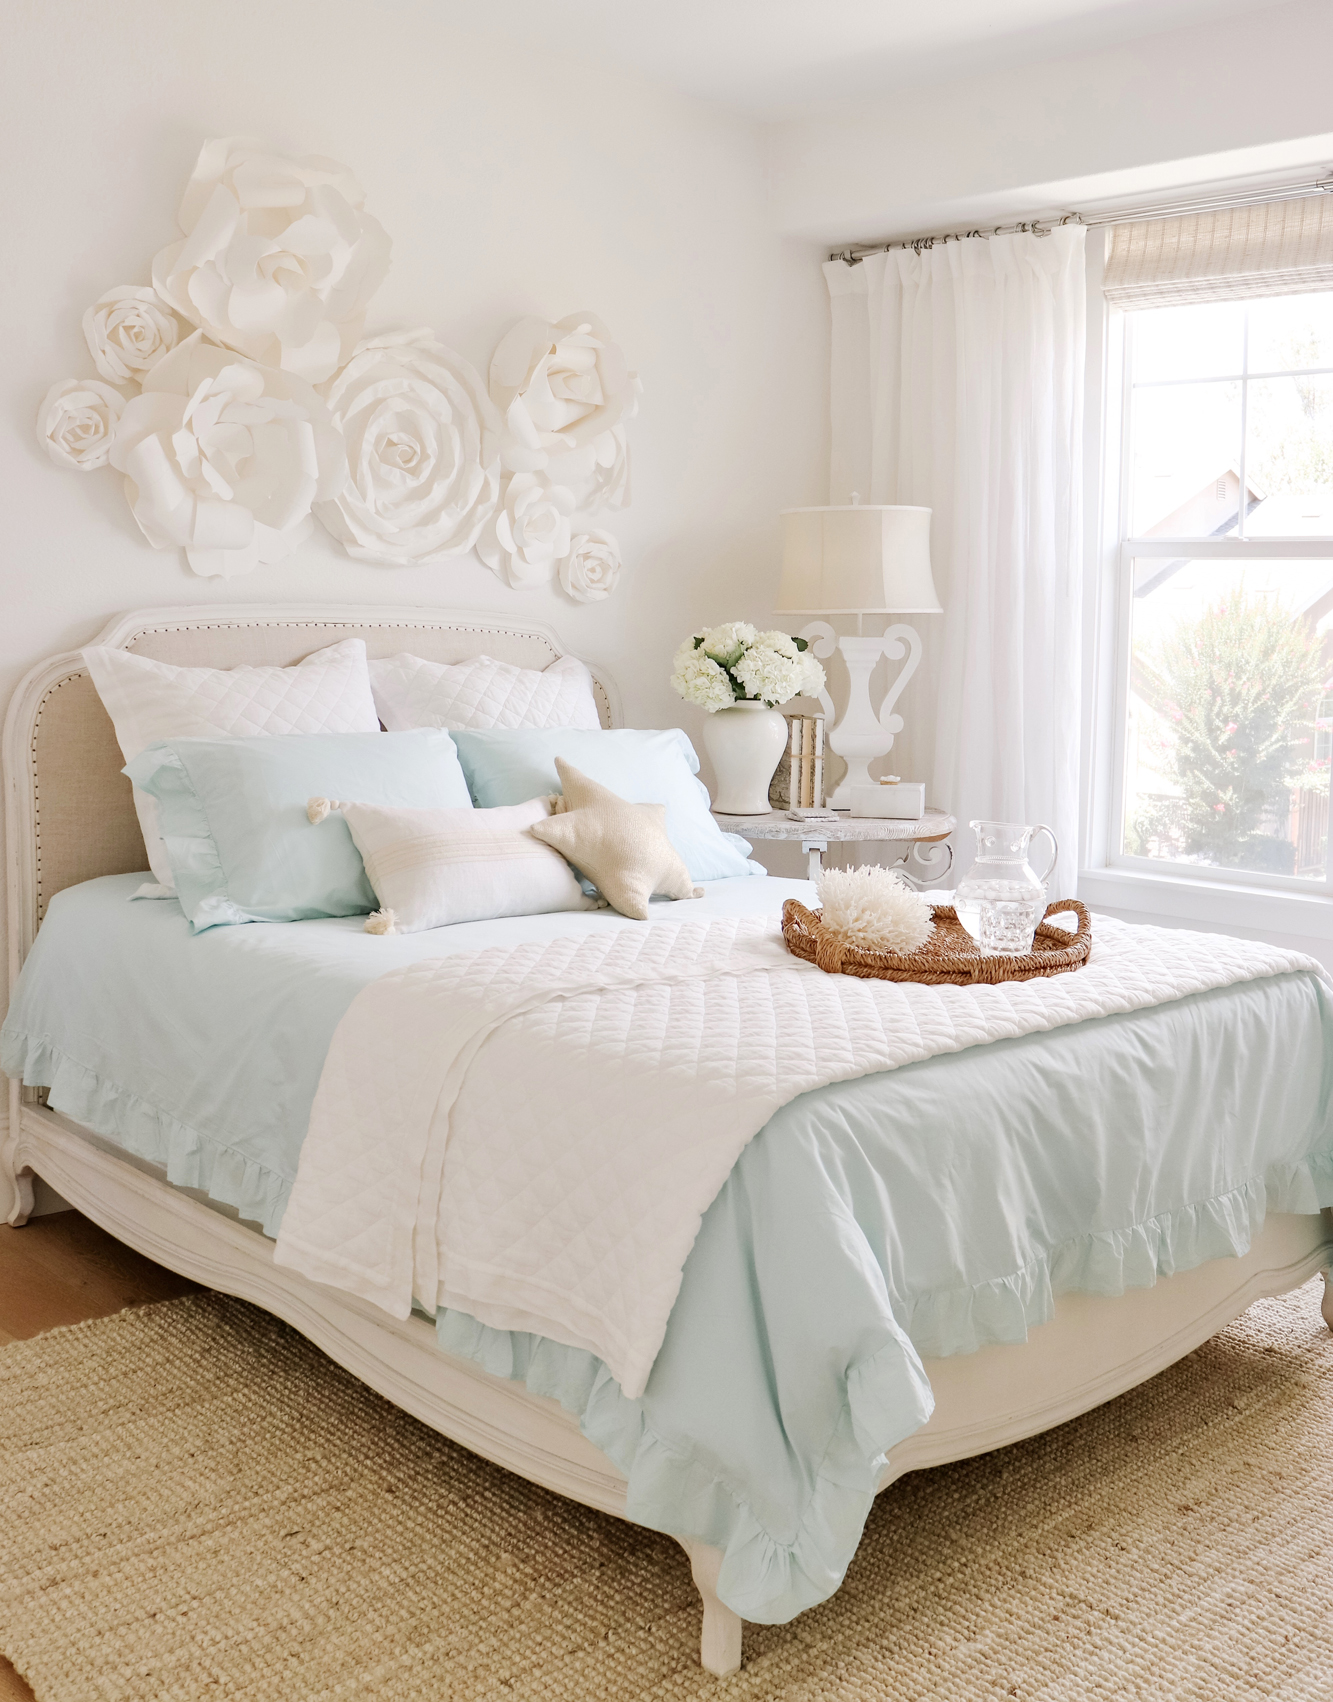 Summer Coastal Home Decor on a Budget - Beachy & relaxed vibes in a coastal themed bedroom. Affordable home decor options in the blue tones.